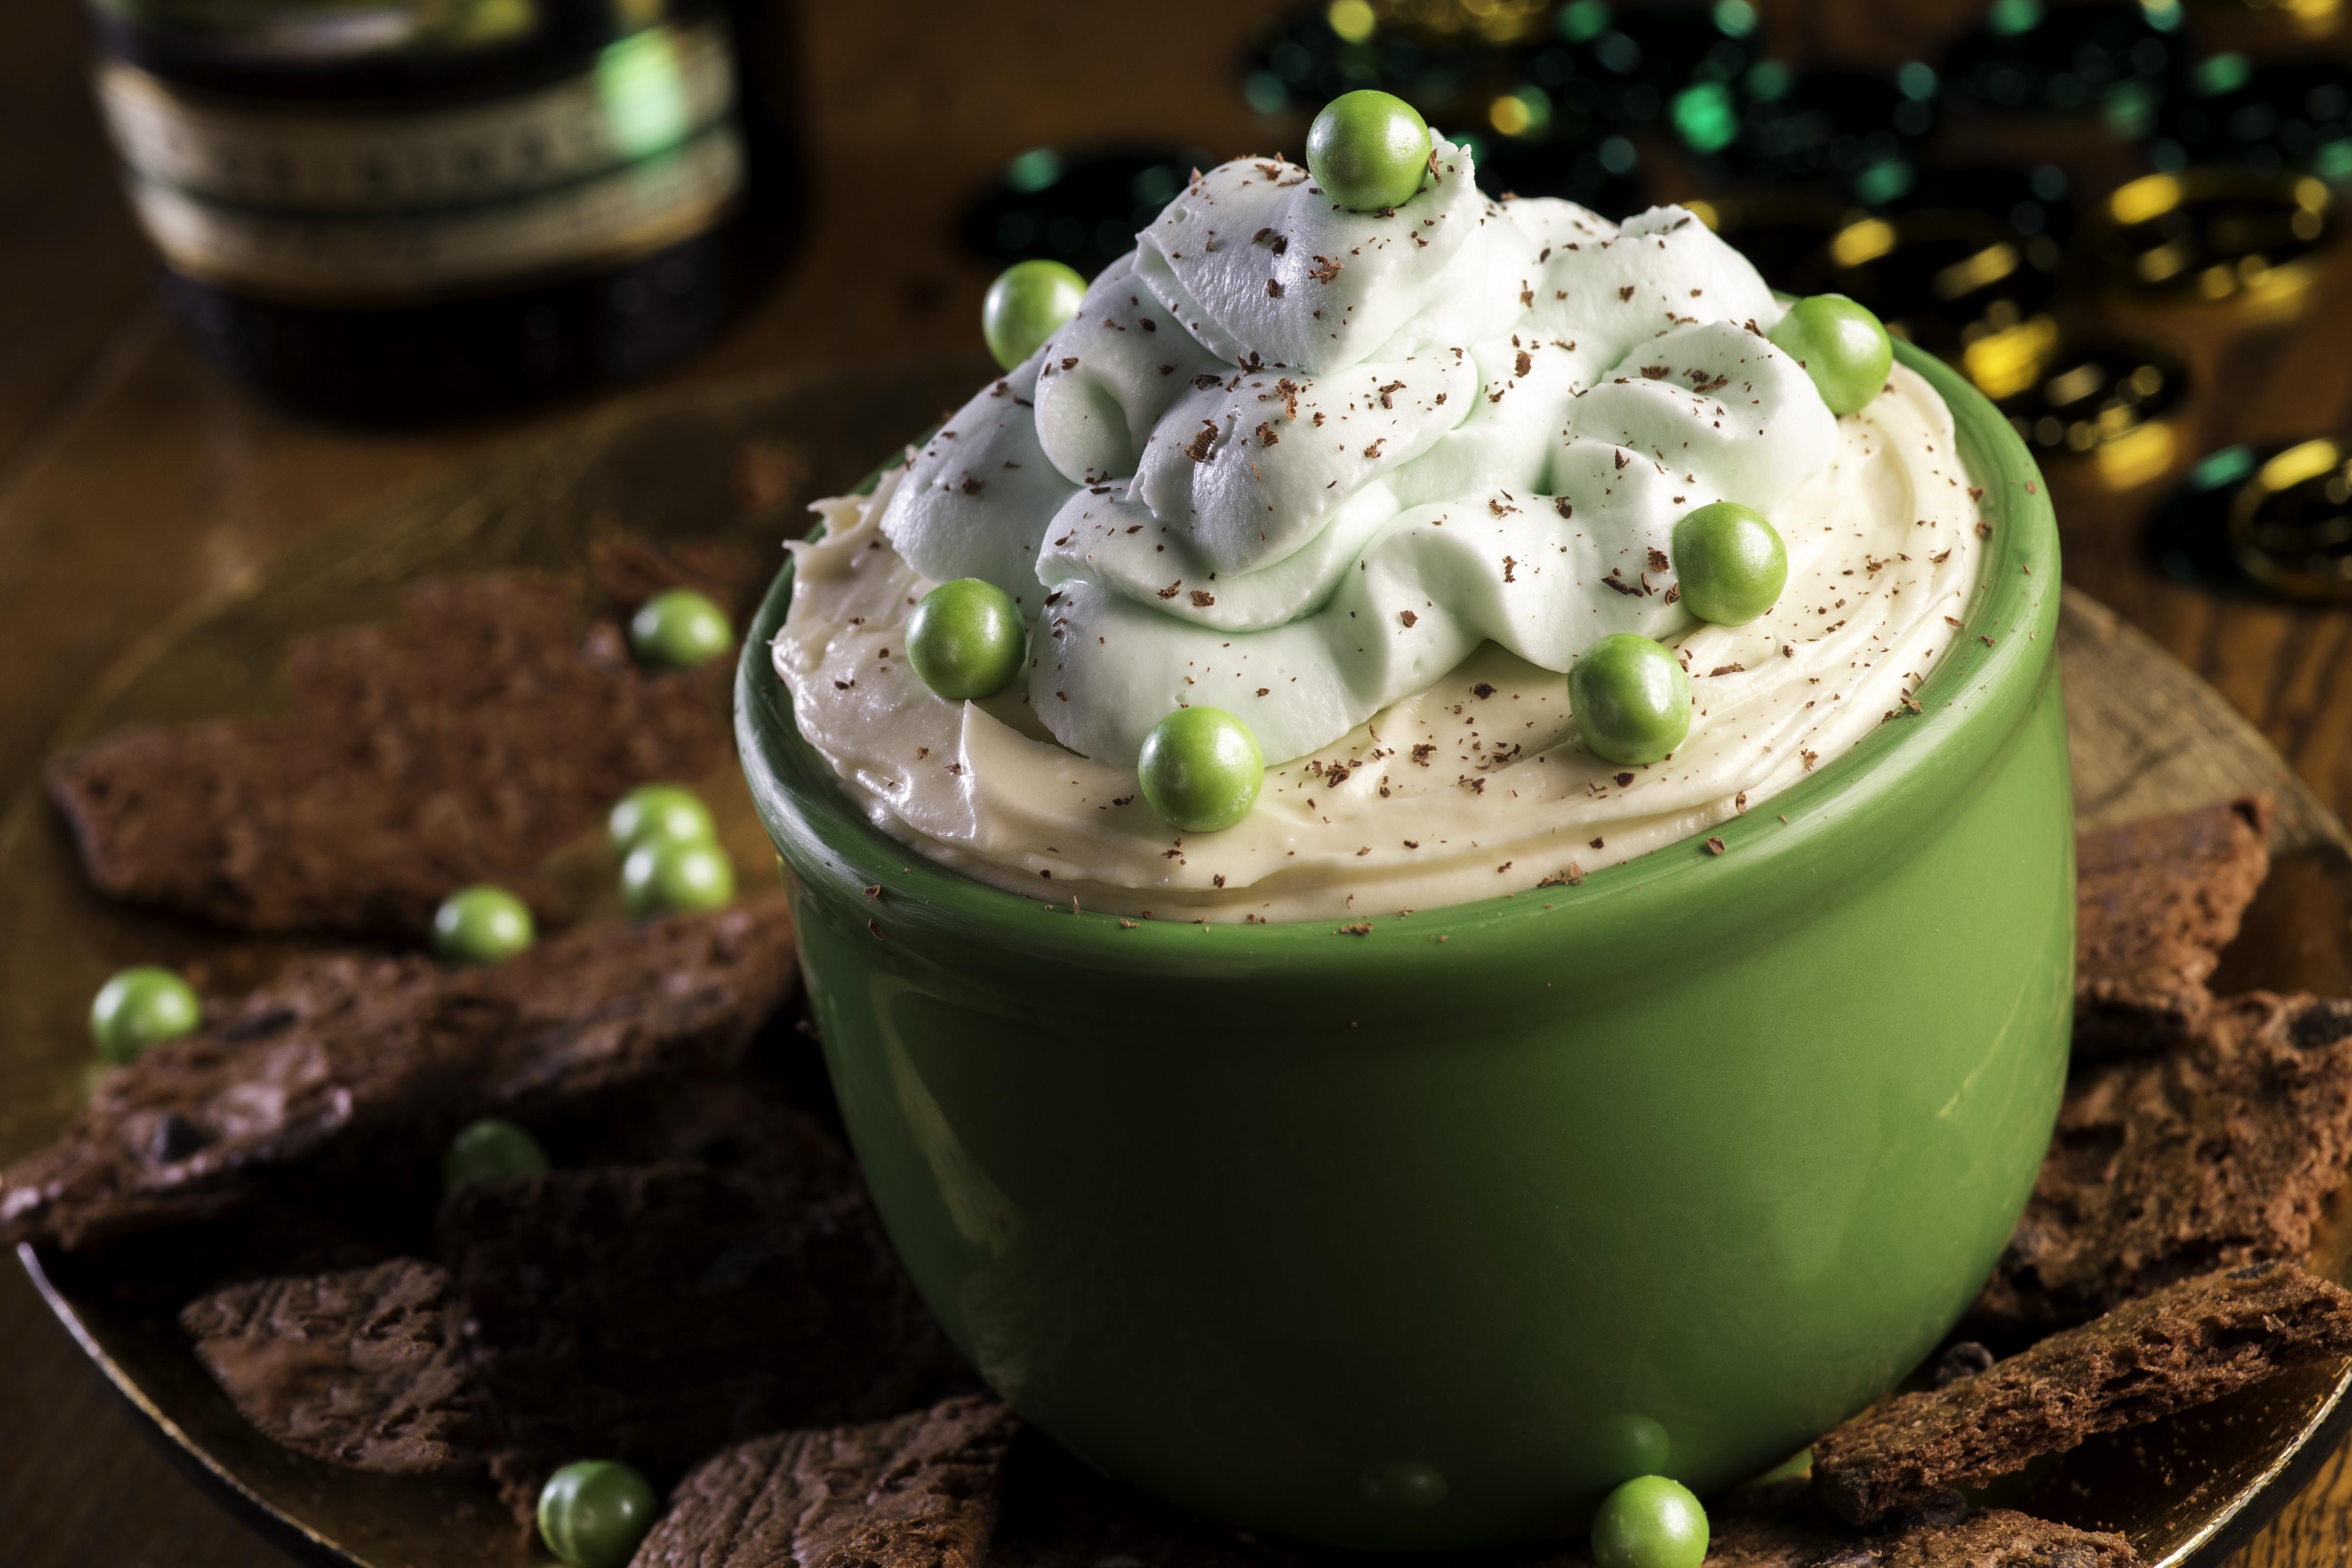 A delicious twist on your normal dessert dip, this boozy Irish Cream Dip with a homemade mint whipped cream is light, fluffy, and creamy in all the right ways. 